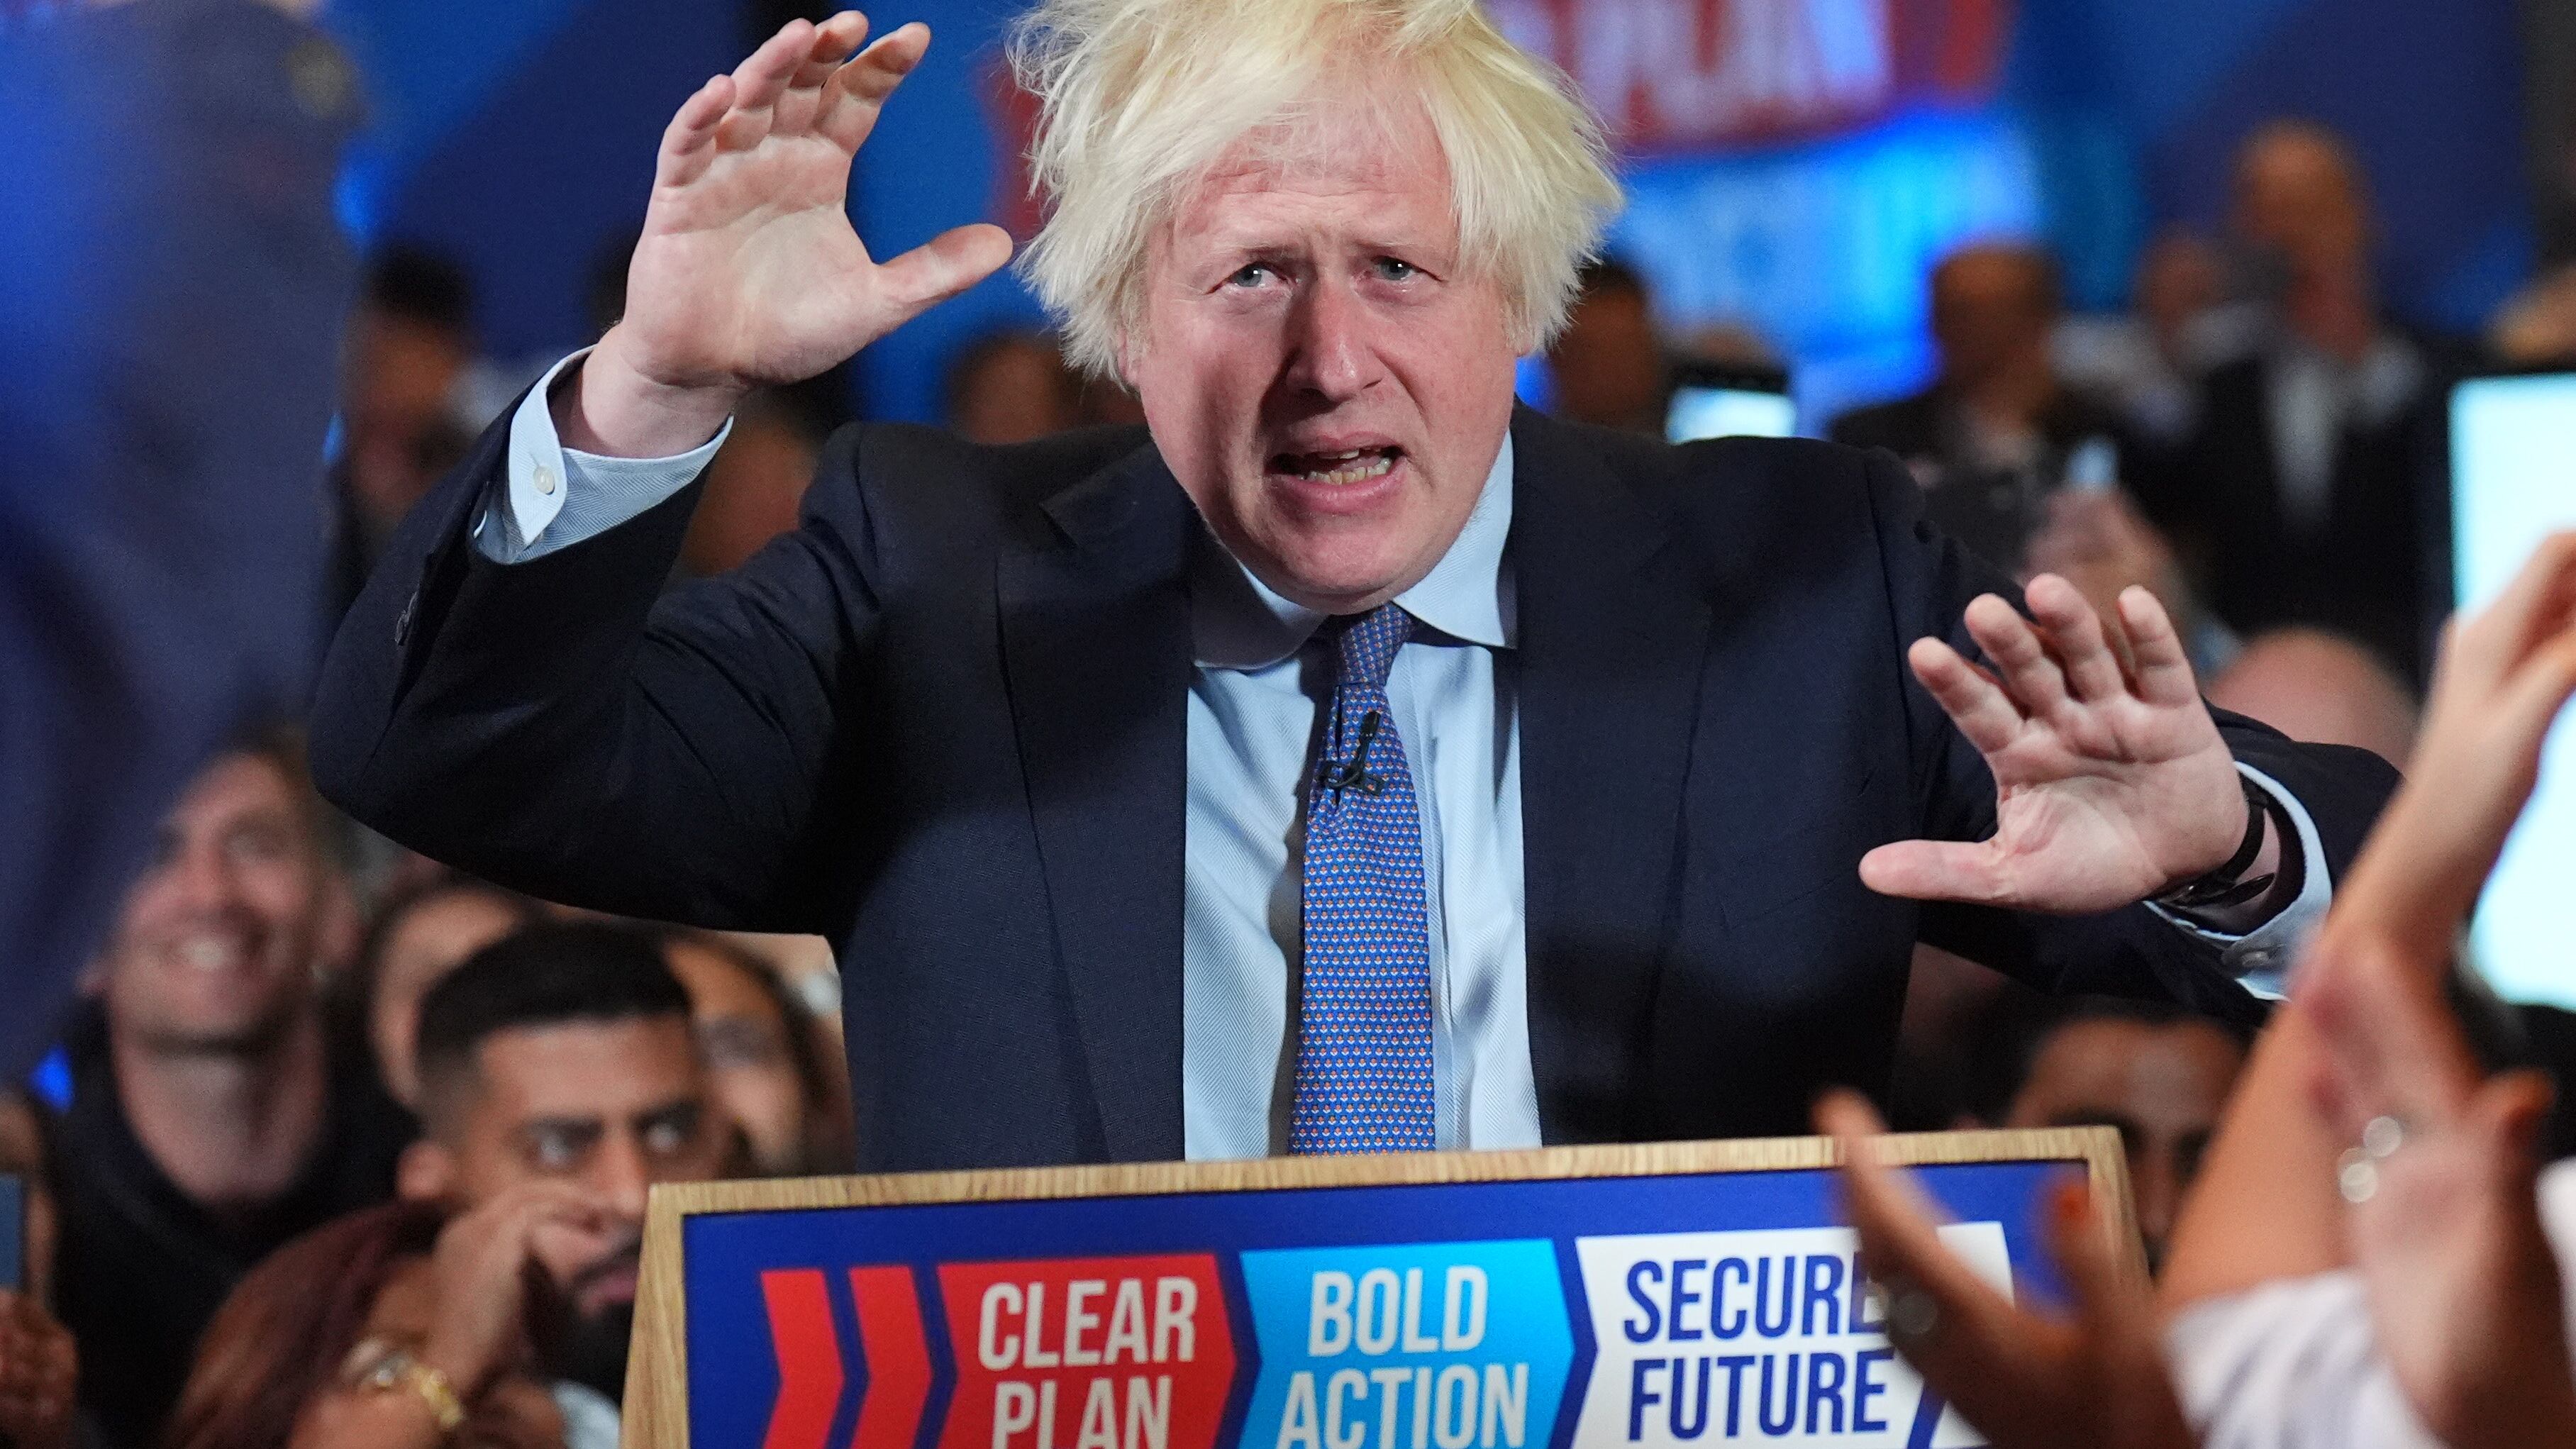 Boris Johnson made a surprise appearance at a Tory campaign event